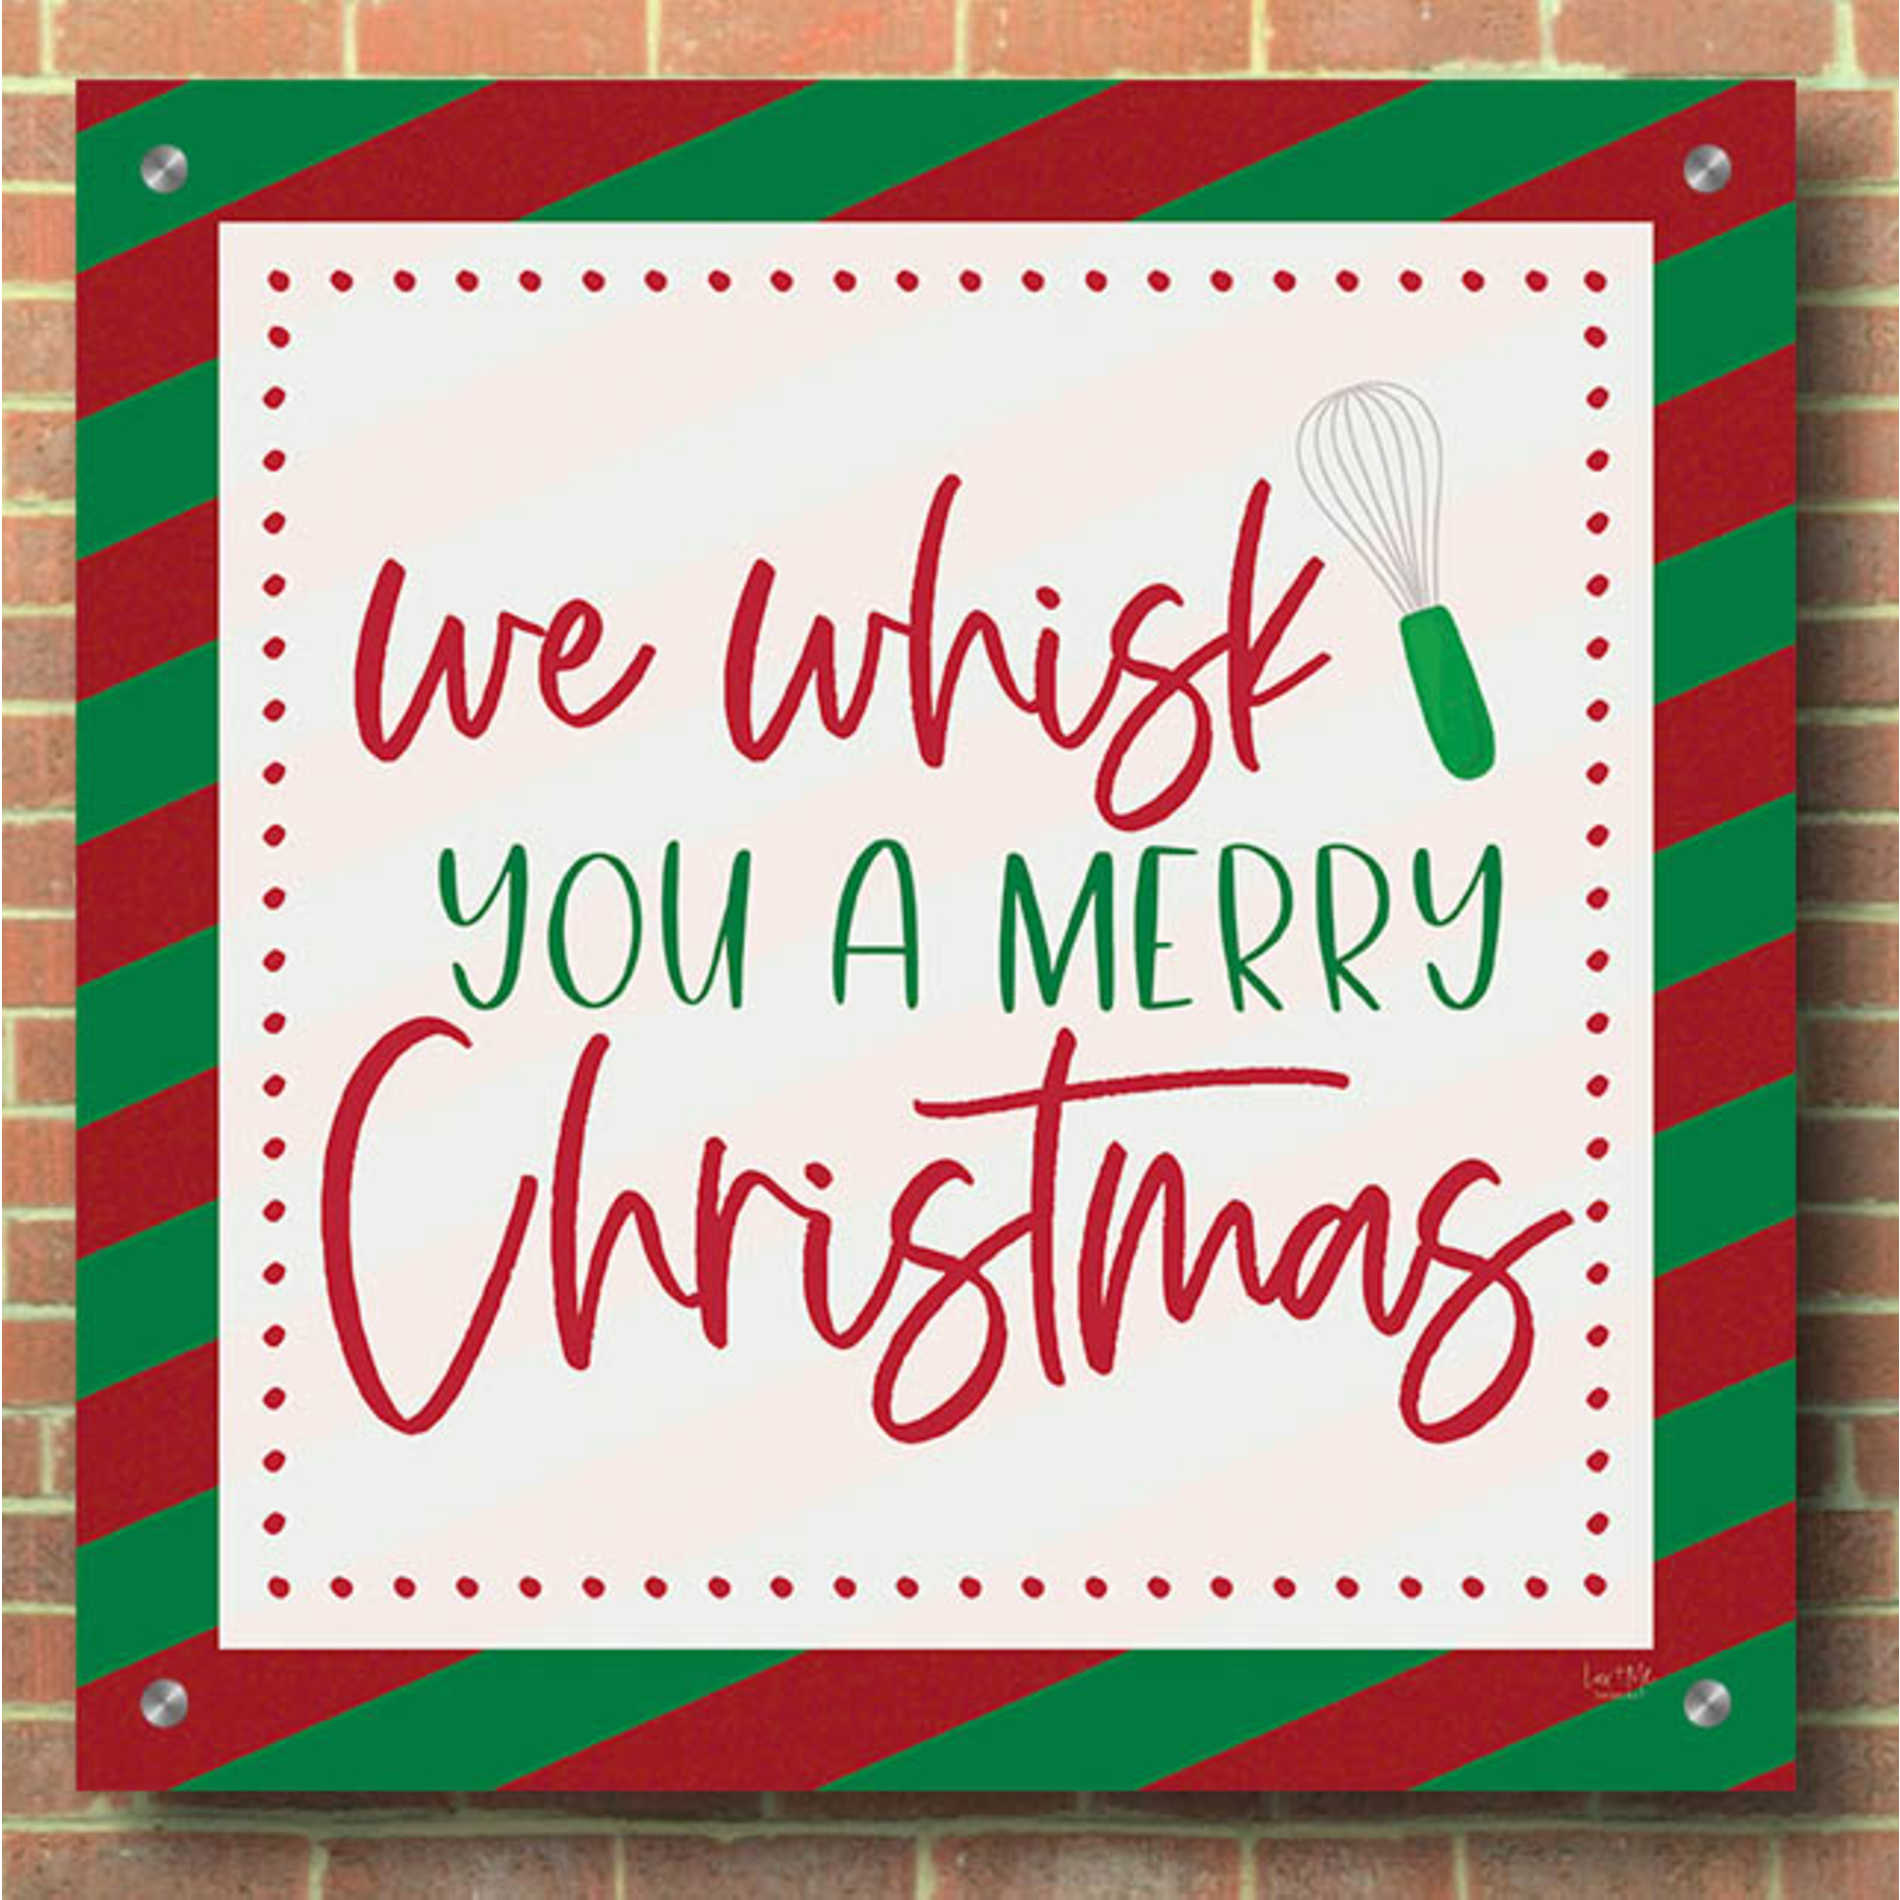 Epic Art 'We Wisk You a Merry Christmas' by Lux + Me, Acrylic Glass Wall Art,36x36